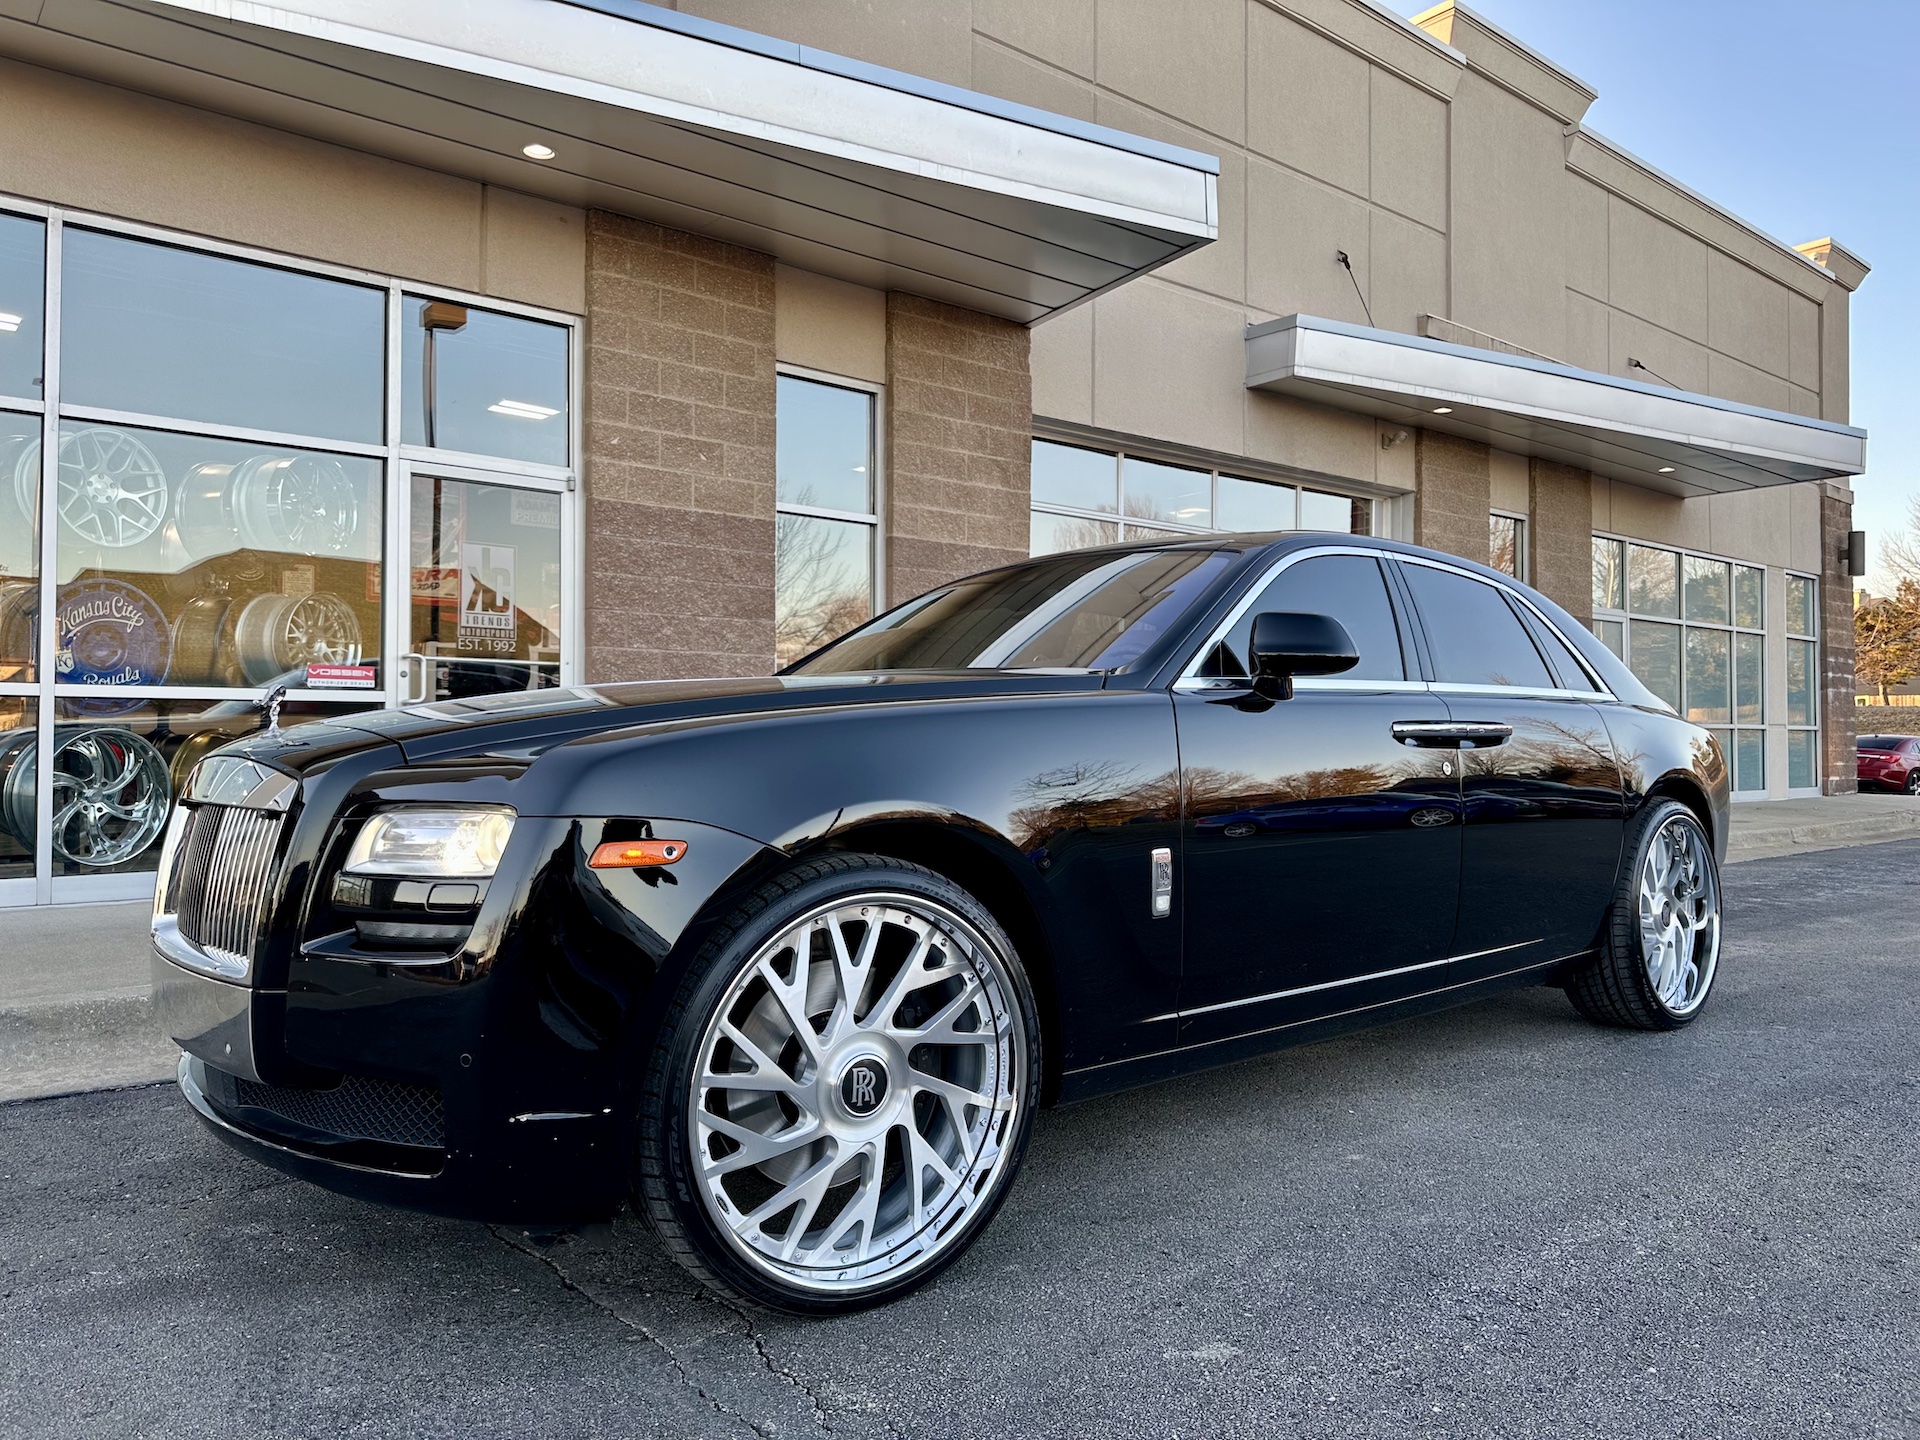  Rolls-Royce Ghost with 